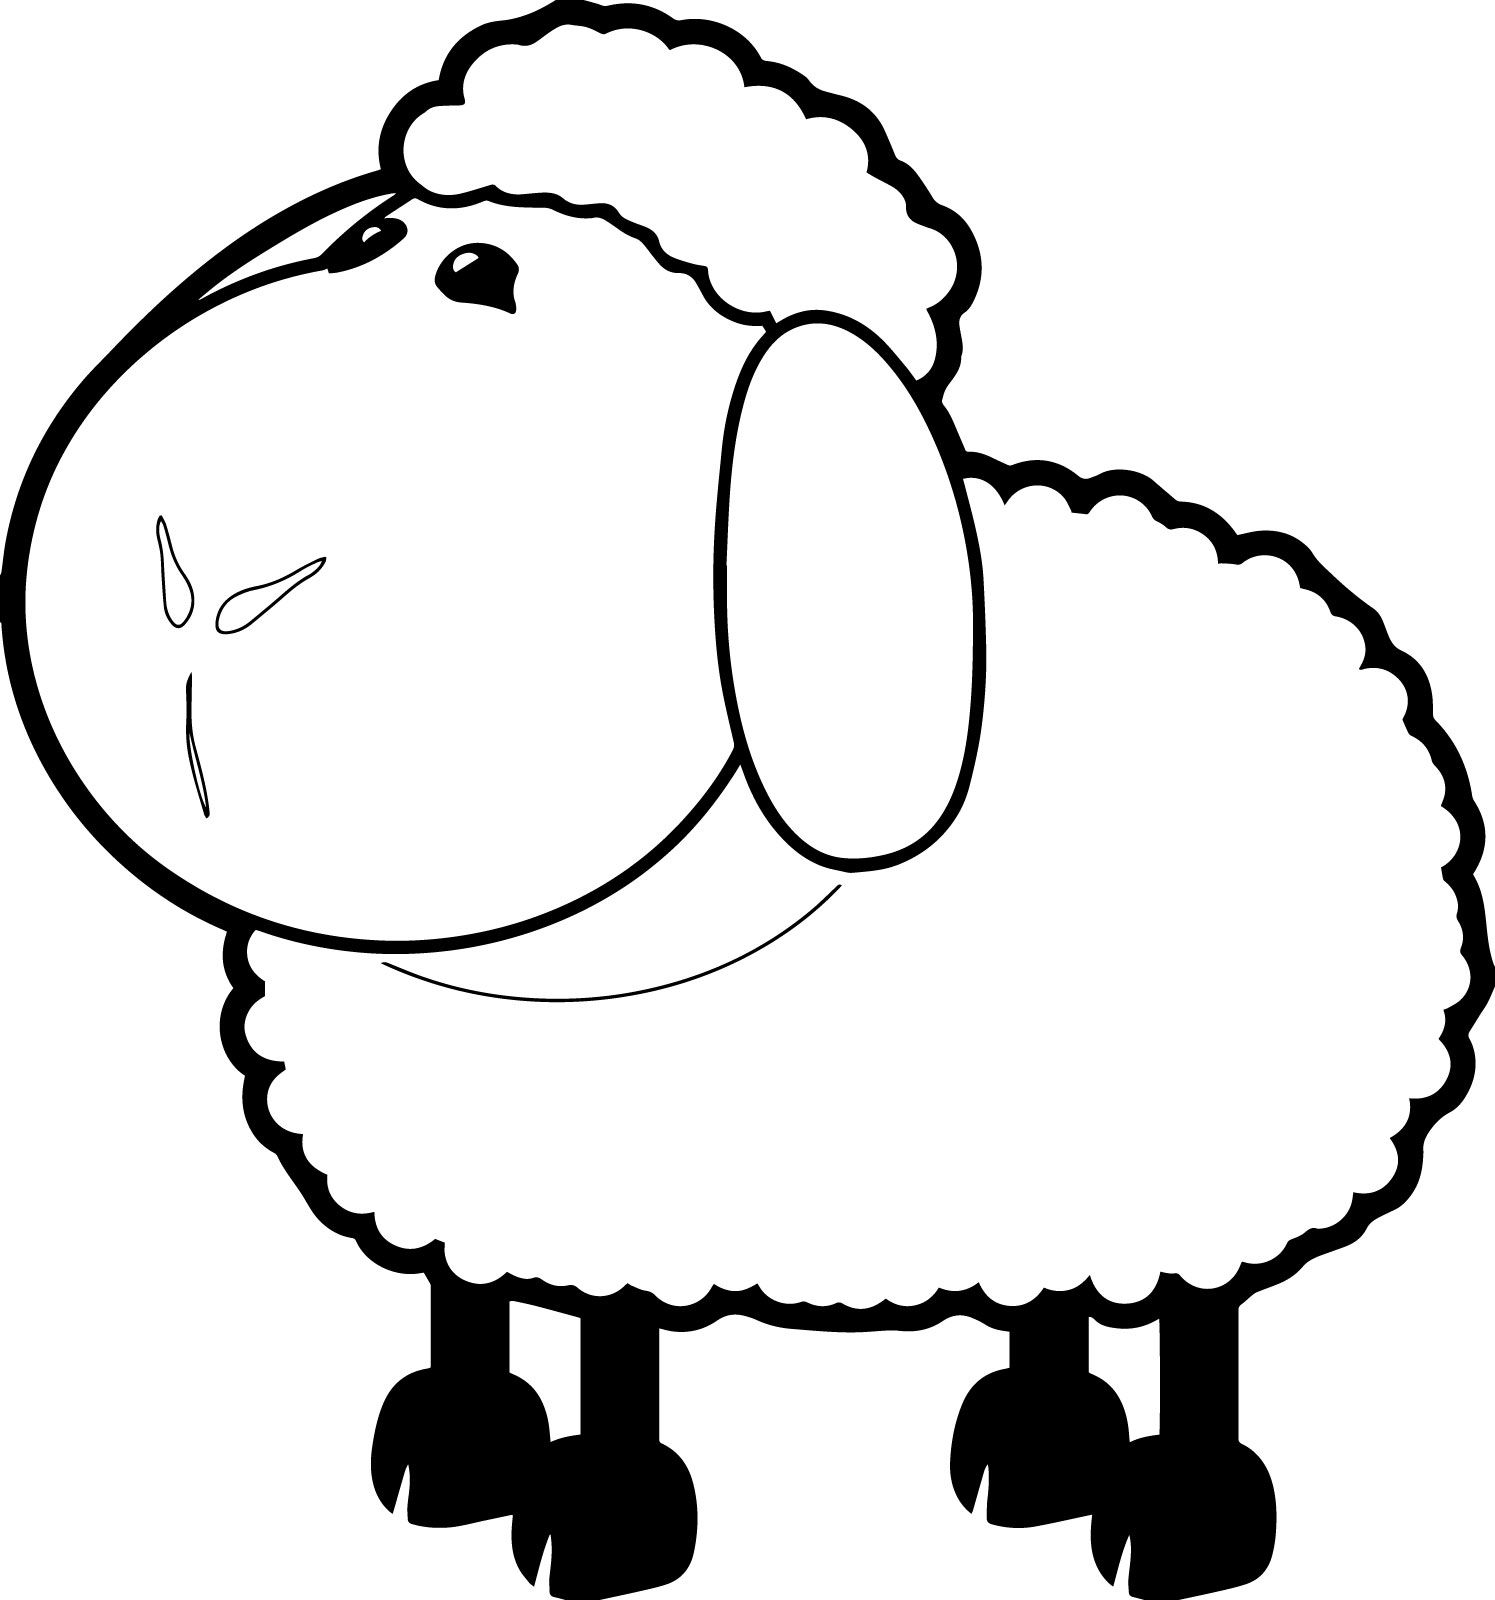 Sheep Coloring Pages | Wecoloringpage